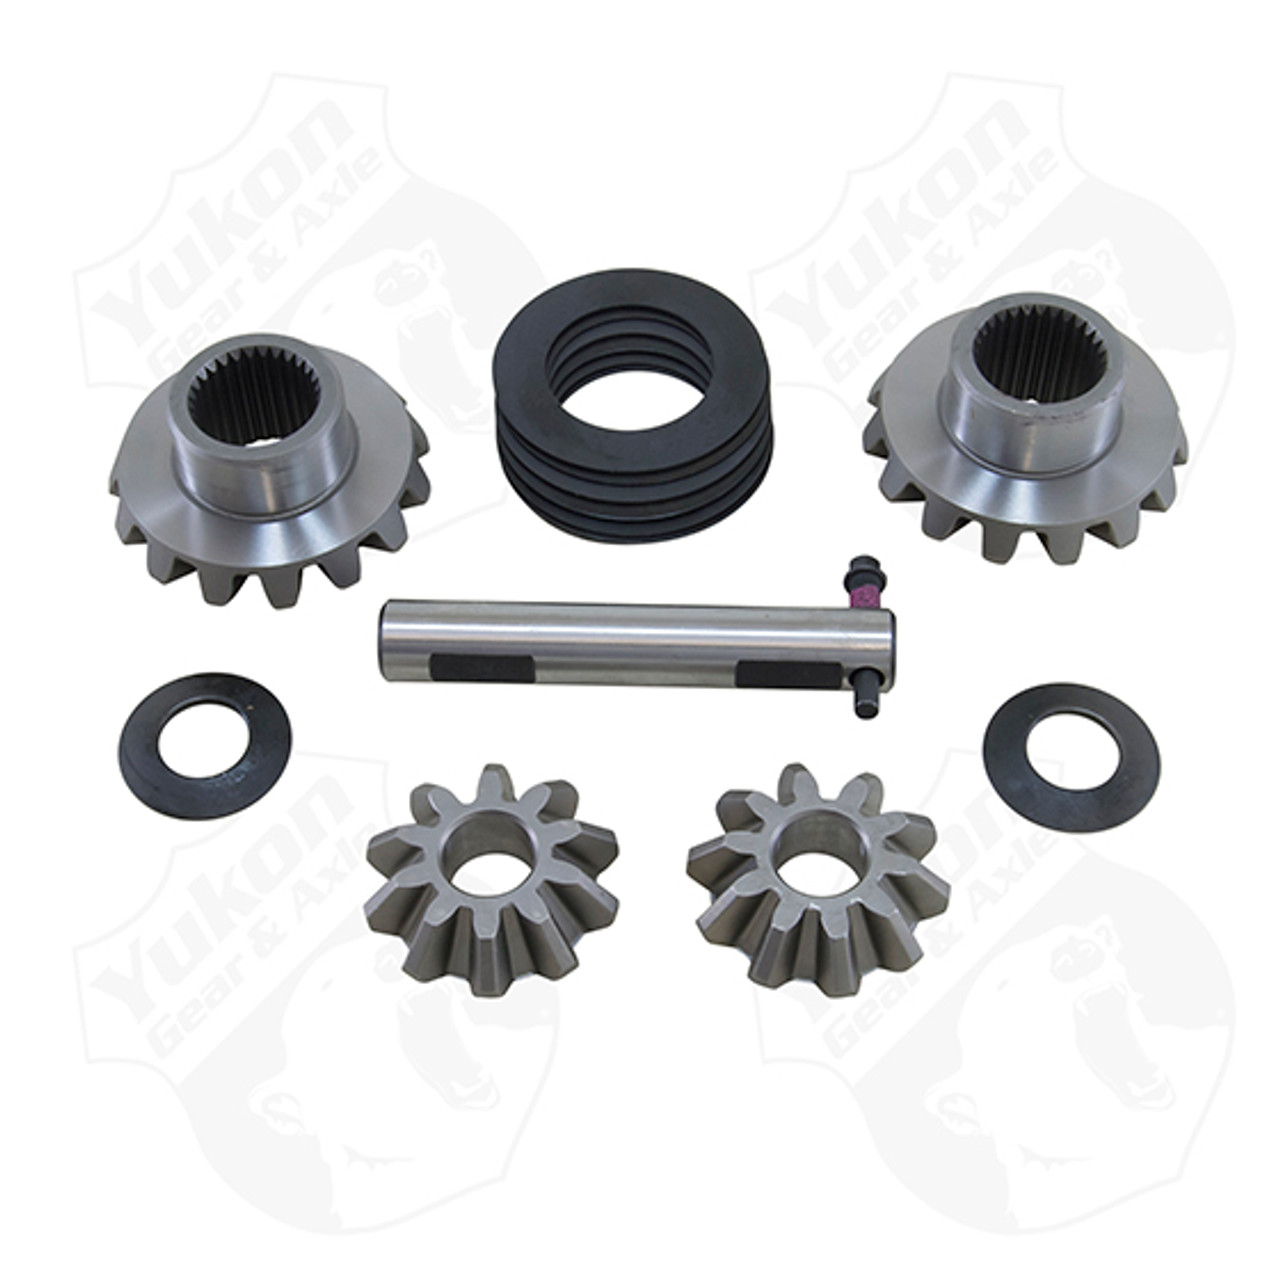 Yukon standard open spider gear kit for '97 and newer 8.25" Chrysler with 29 spline axles